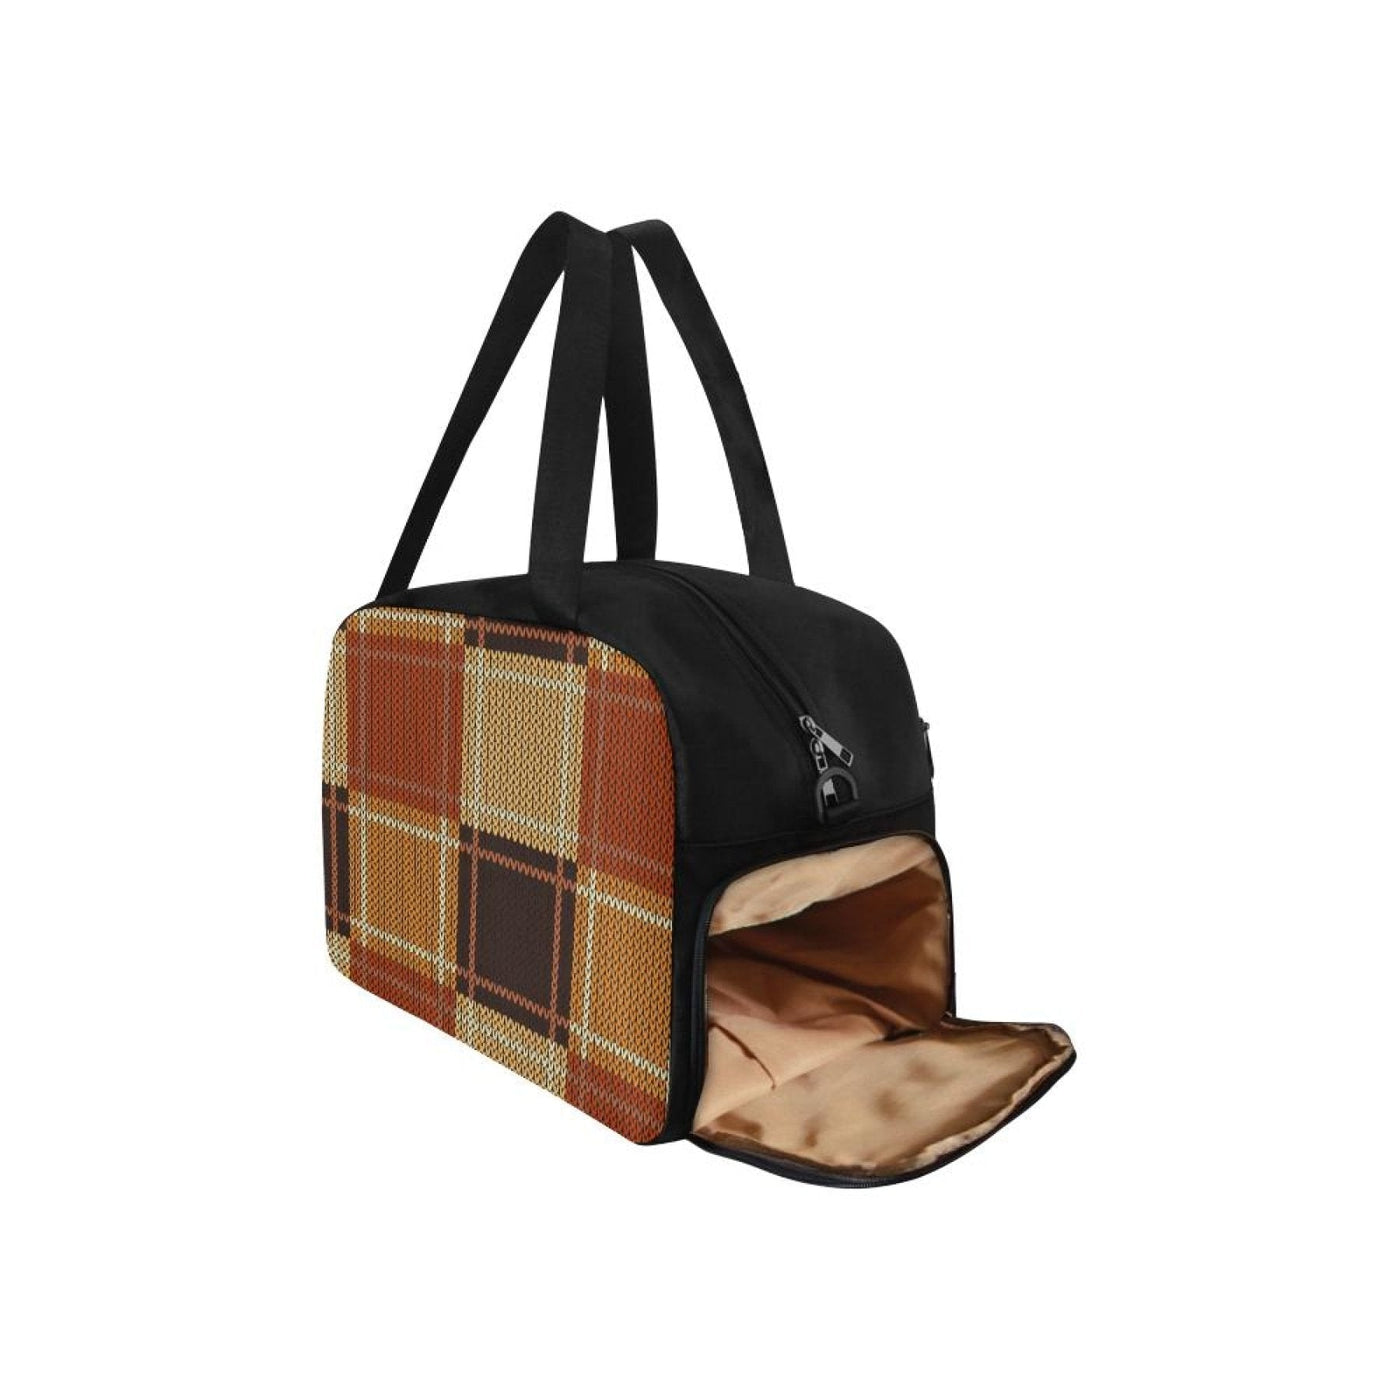 Travel Carry-on Bag / Brown And Beige Checkered Style - Bags | Travel Bags